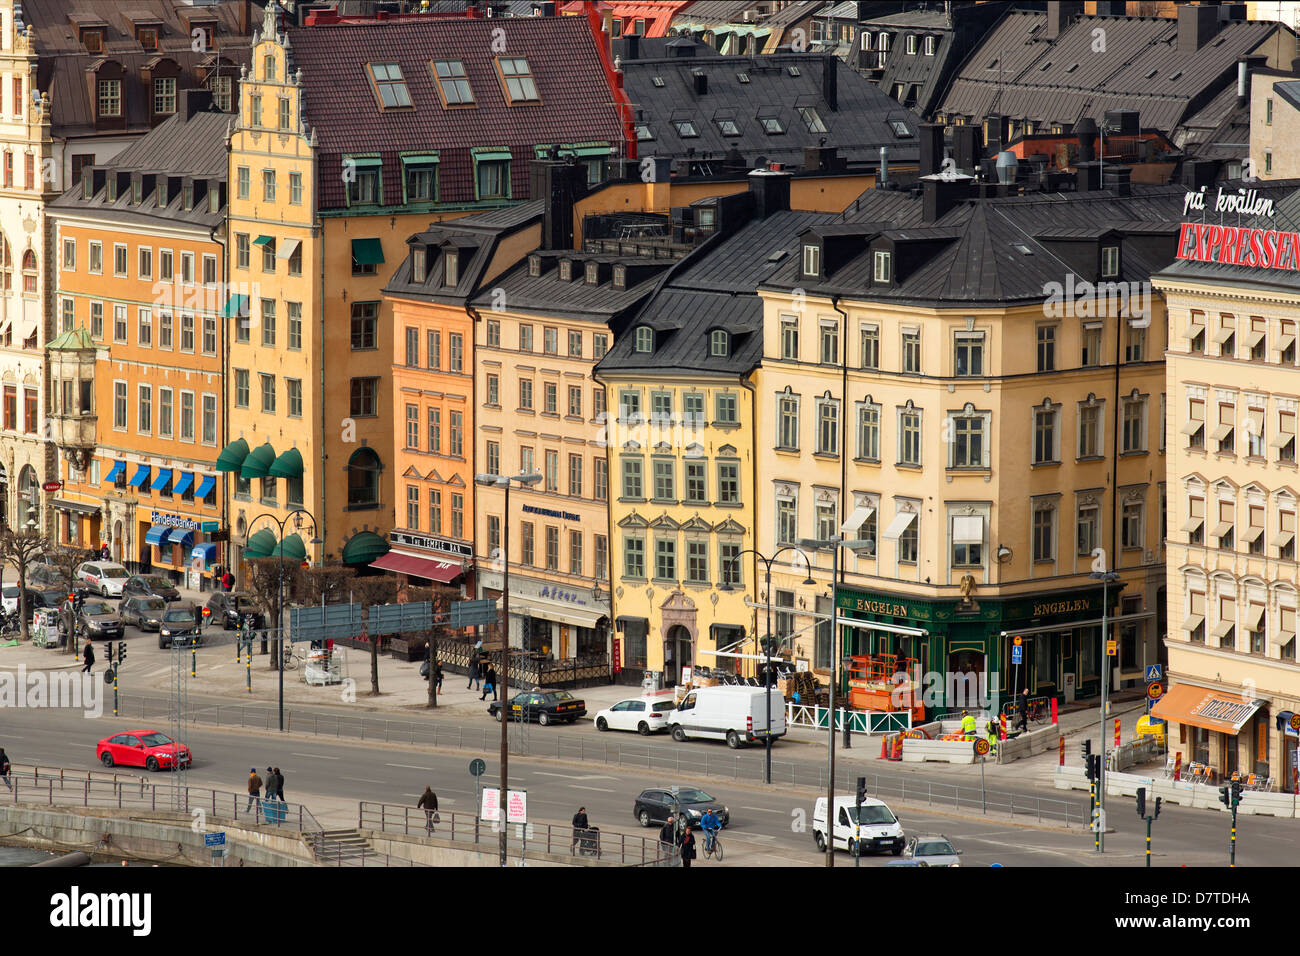 The Old Town, (Gamla Stan) Stockholm, Sweden. Stock Photo